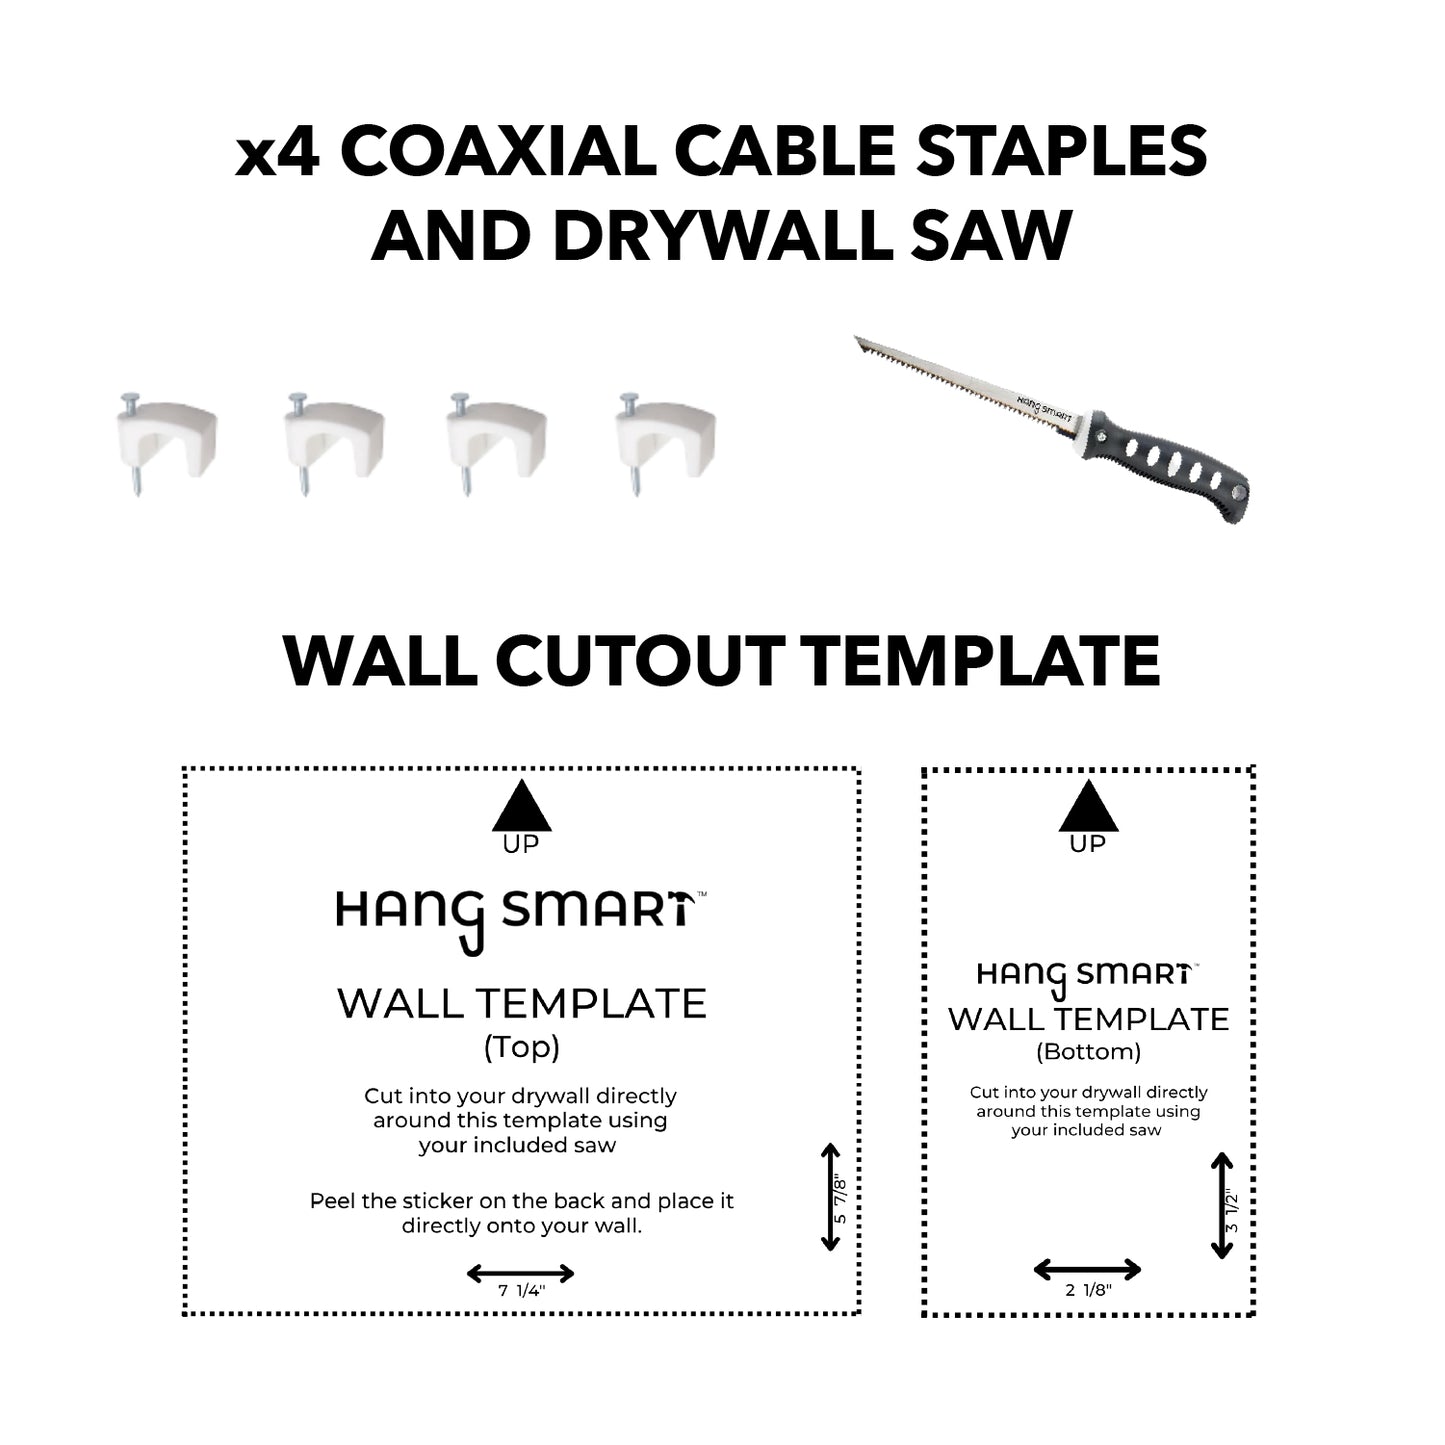 wall cutout template with drywall saw